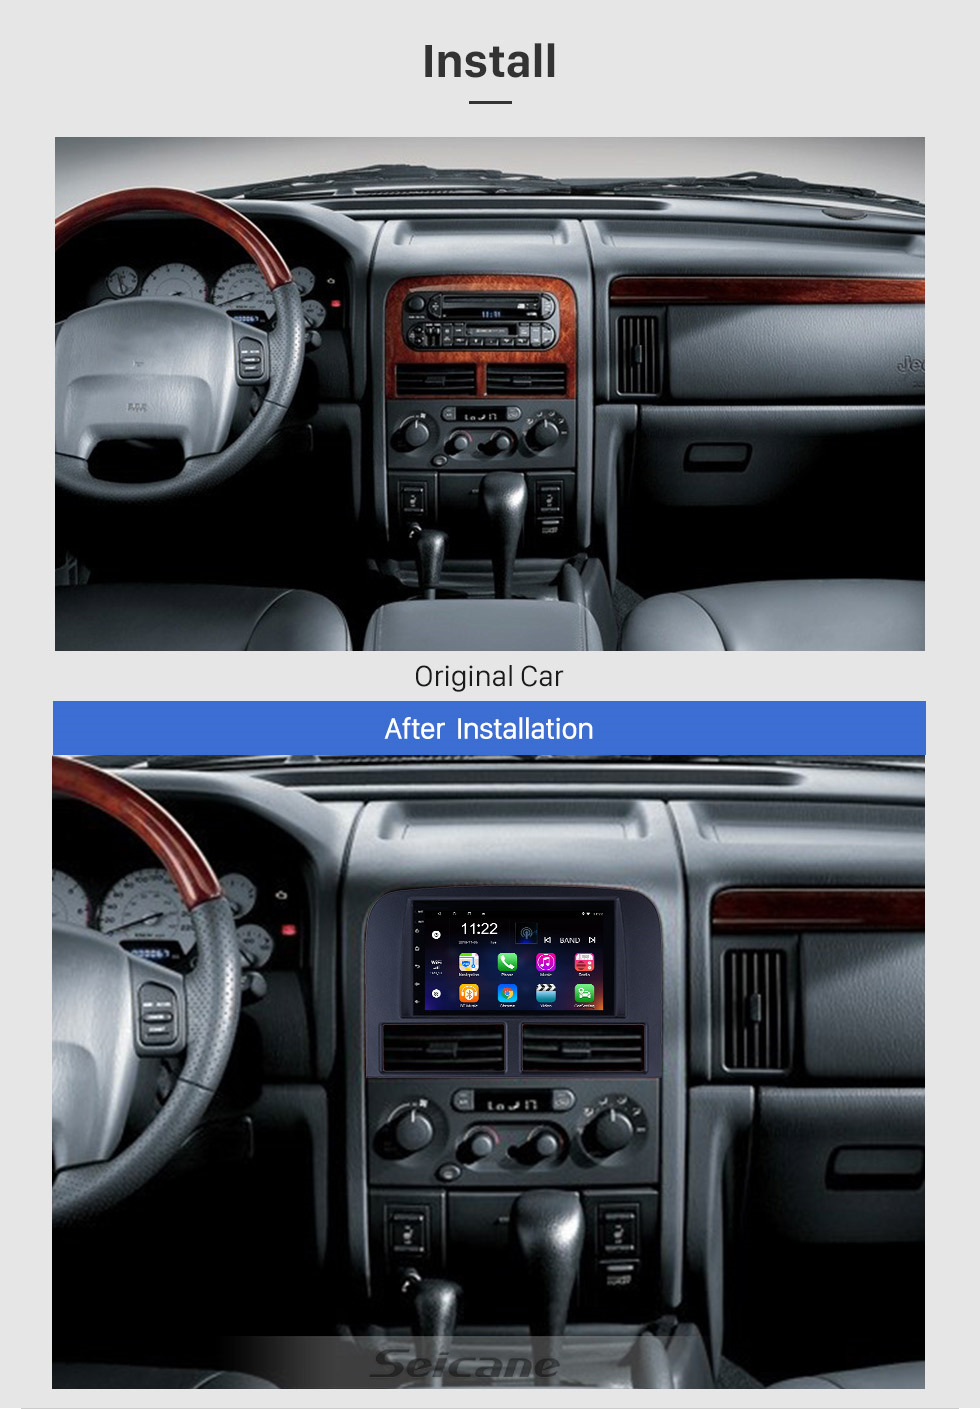 First Sound System - Android Tablet HU, 03 Jeep Grand Cherokee 4x4, Page 3